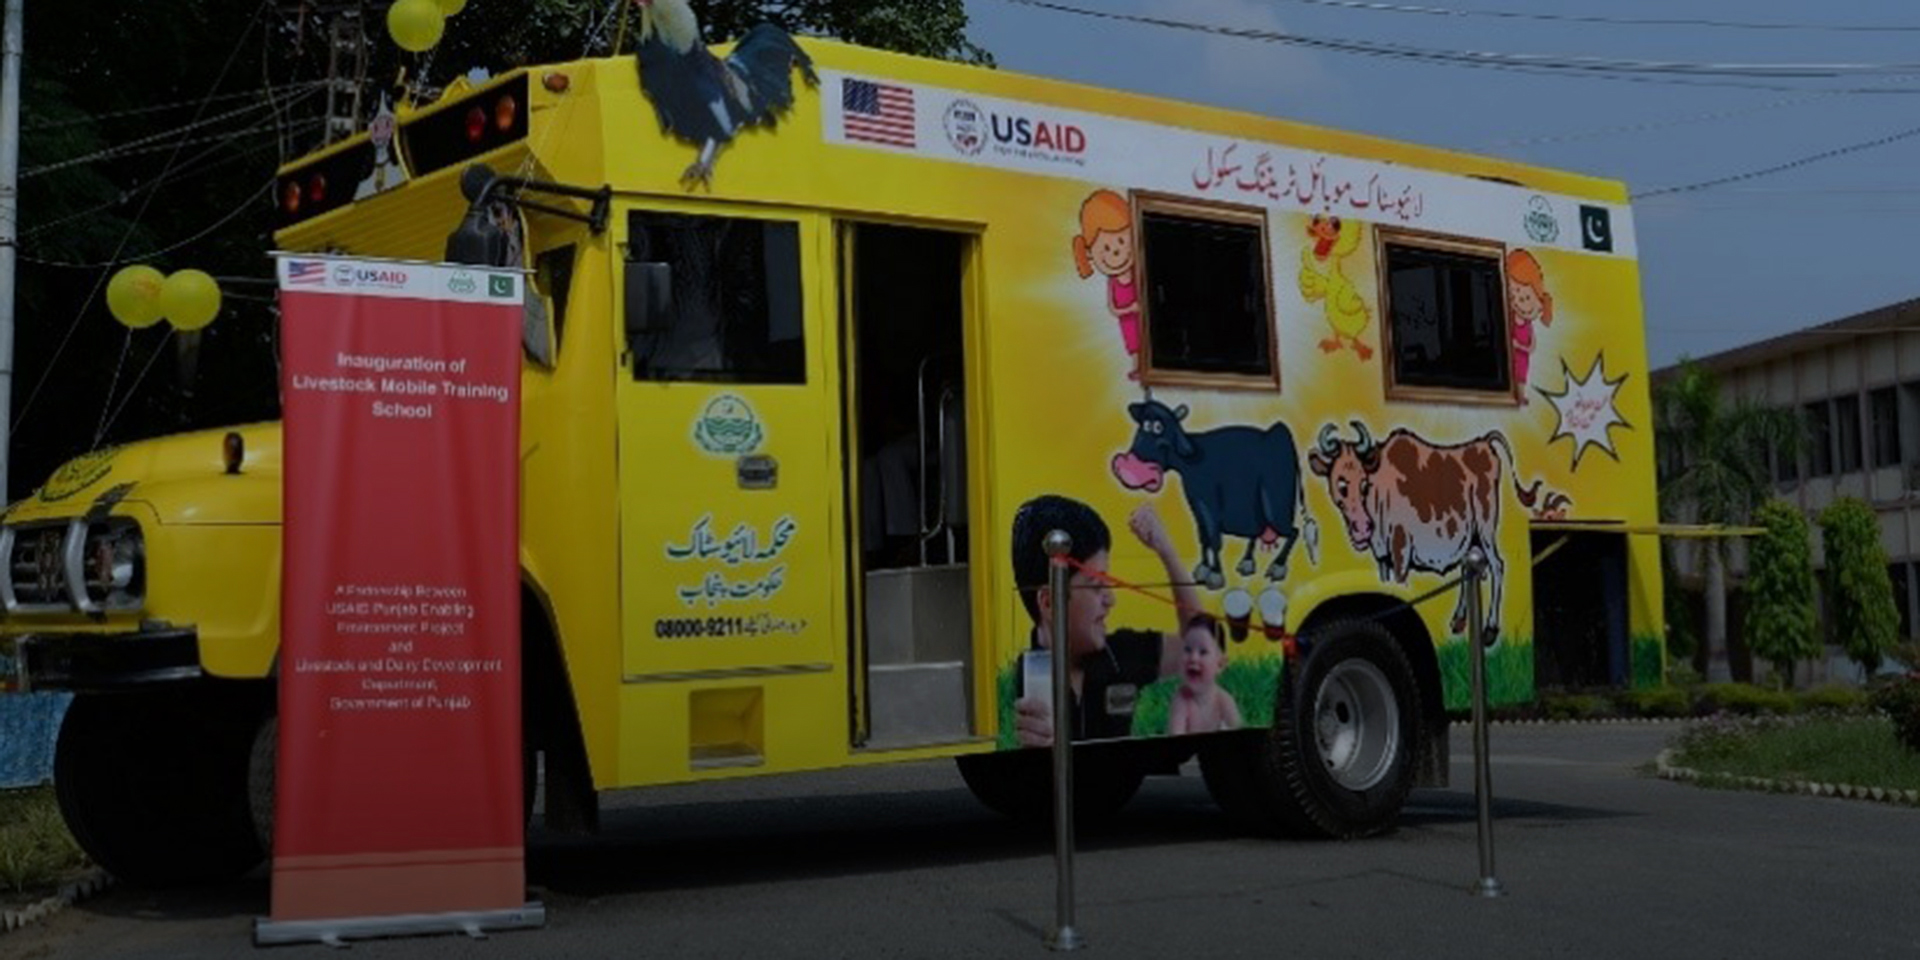 Image of a truck in the shape of a small school bus with cartoon images of cows and children on the side. Beside the truck is a sign that reads 